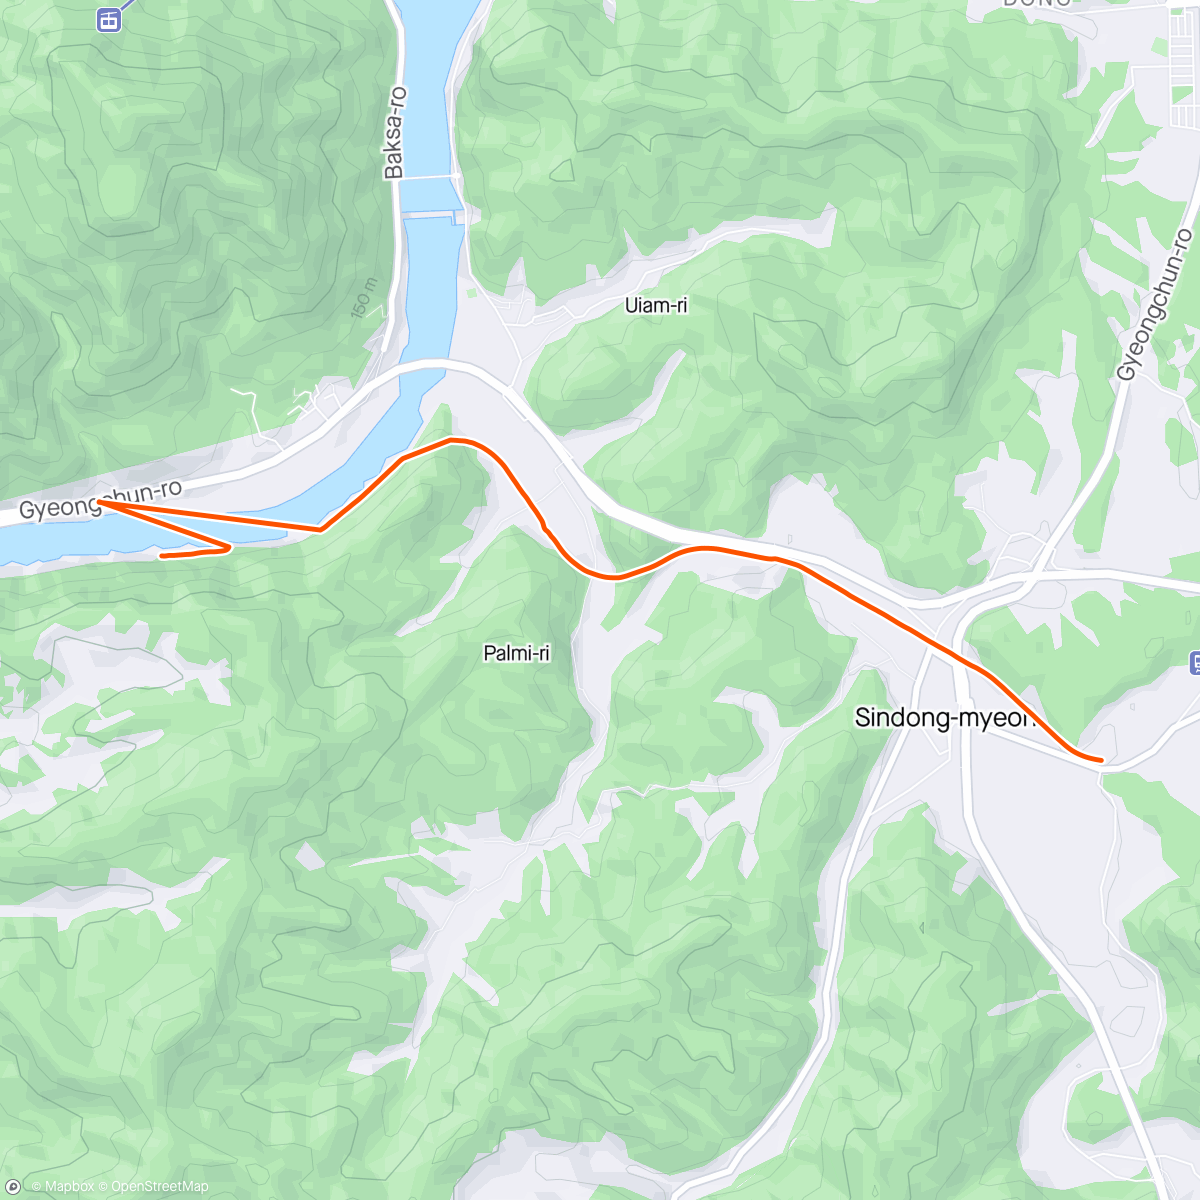 Map of the activity, "Riding" the hills in Seoul